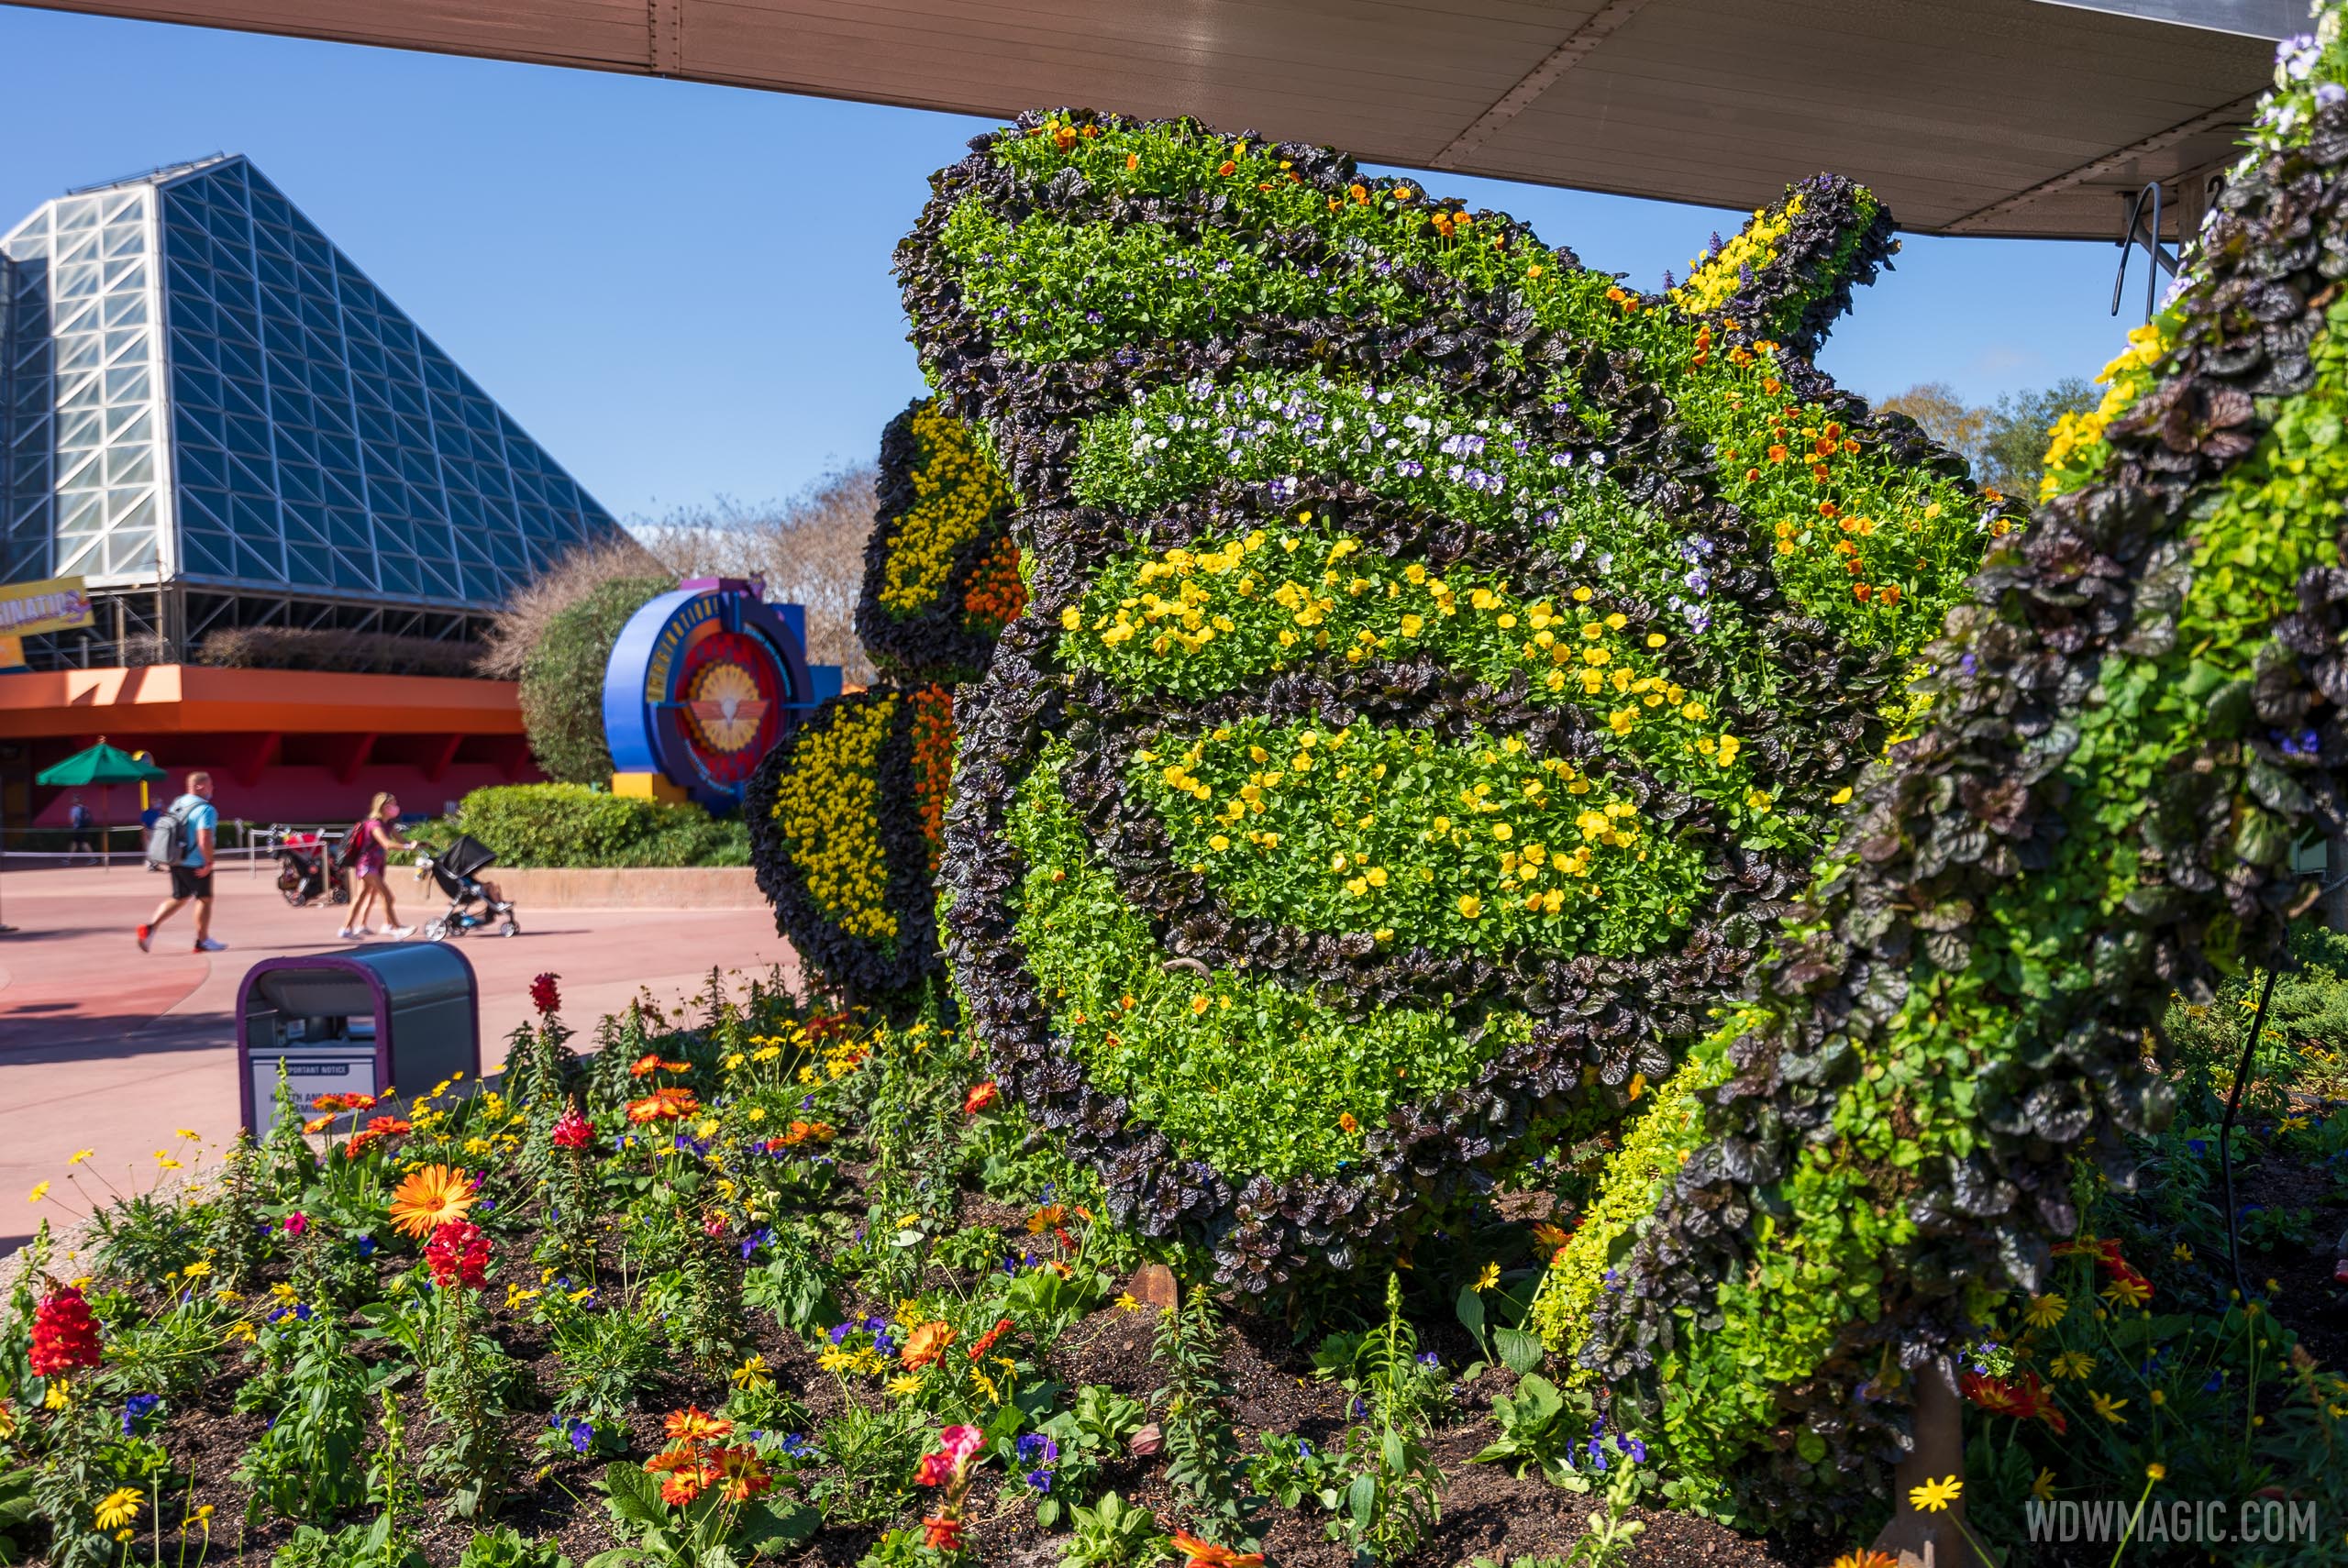 First topiary in place as preparations continue for the 2021 EPCOT Flower and Garden Festival